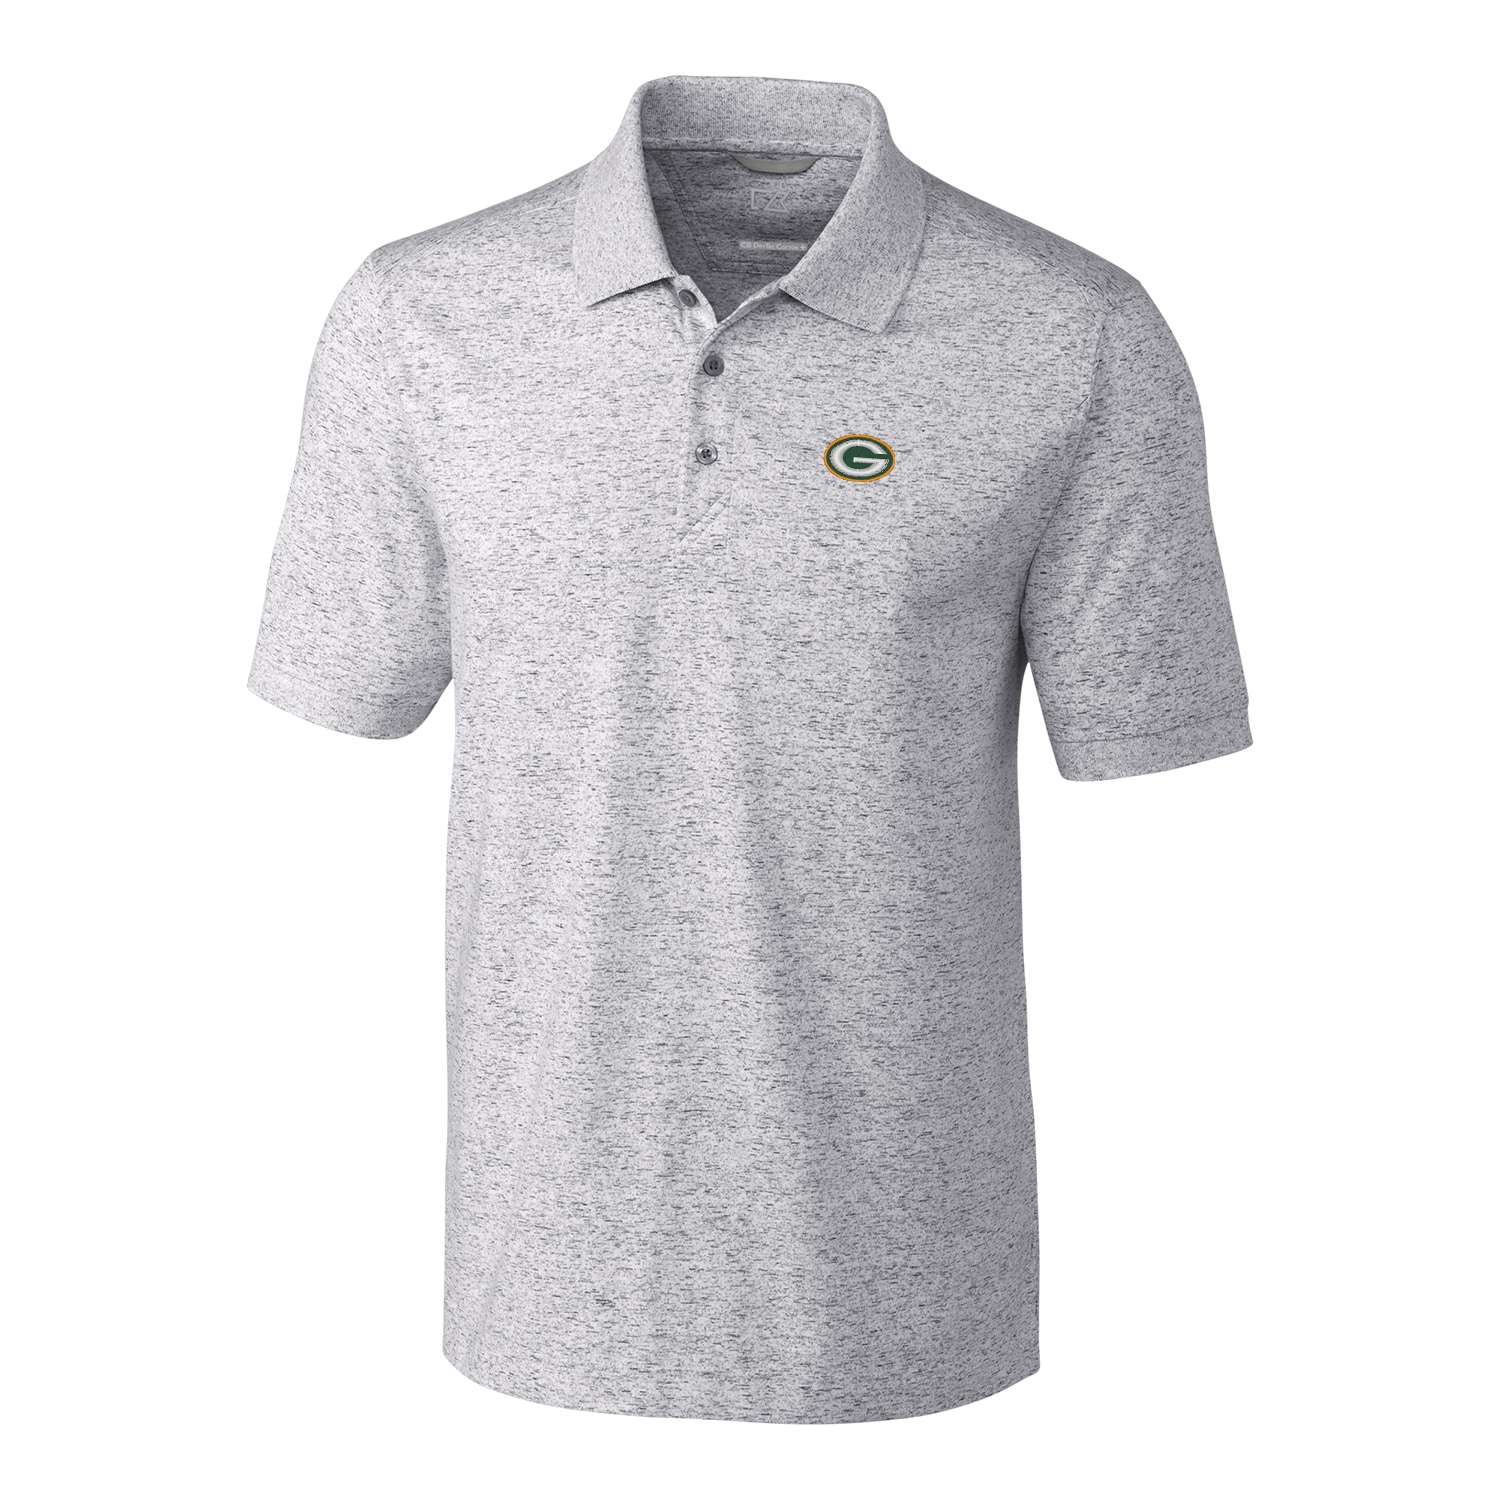 Men's Cutter & Buck Heather Gray Green Bay Packers Big & Tall Space Dye Advantage Polo - image 1 of 1